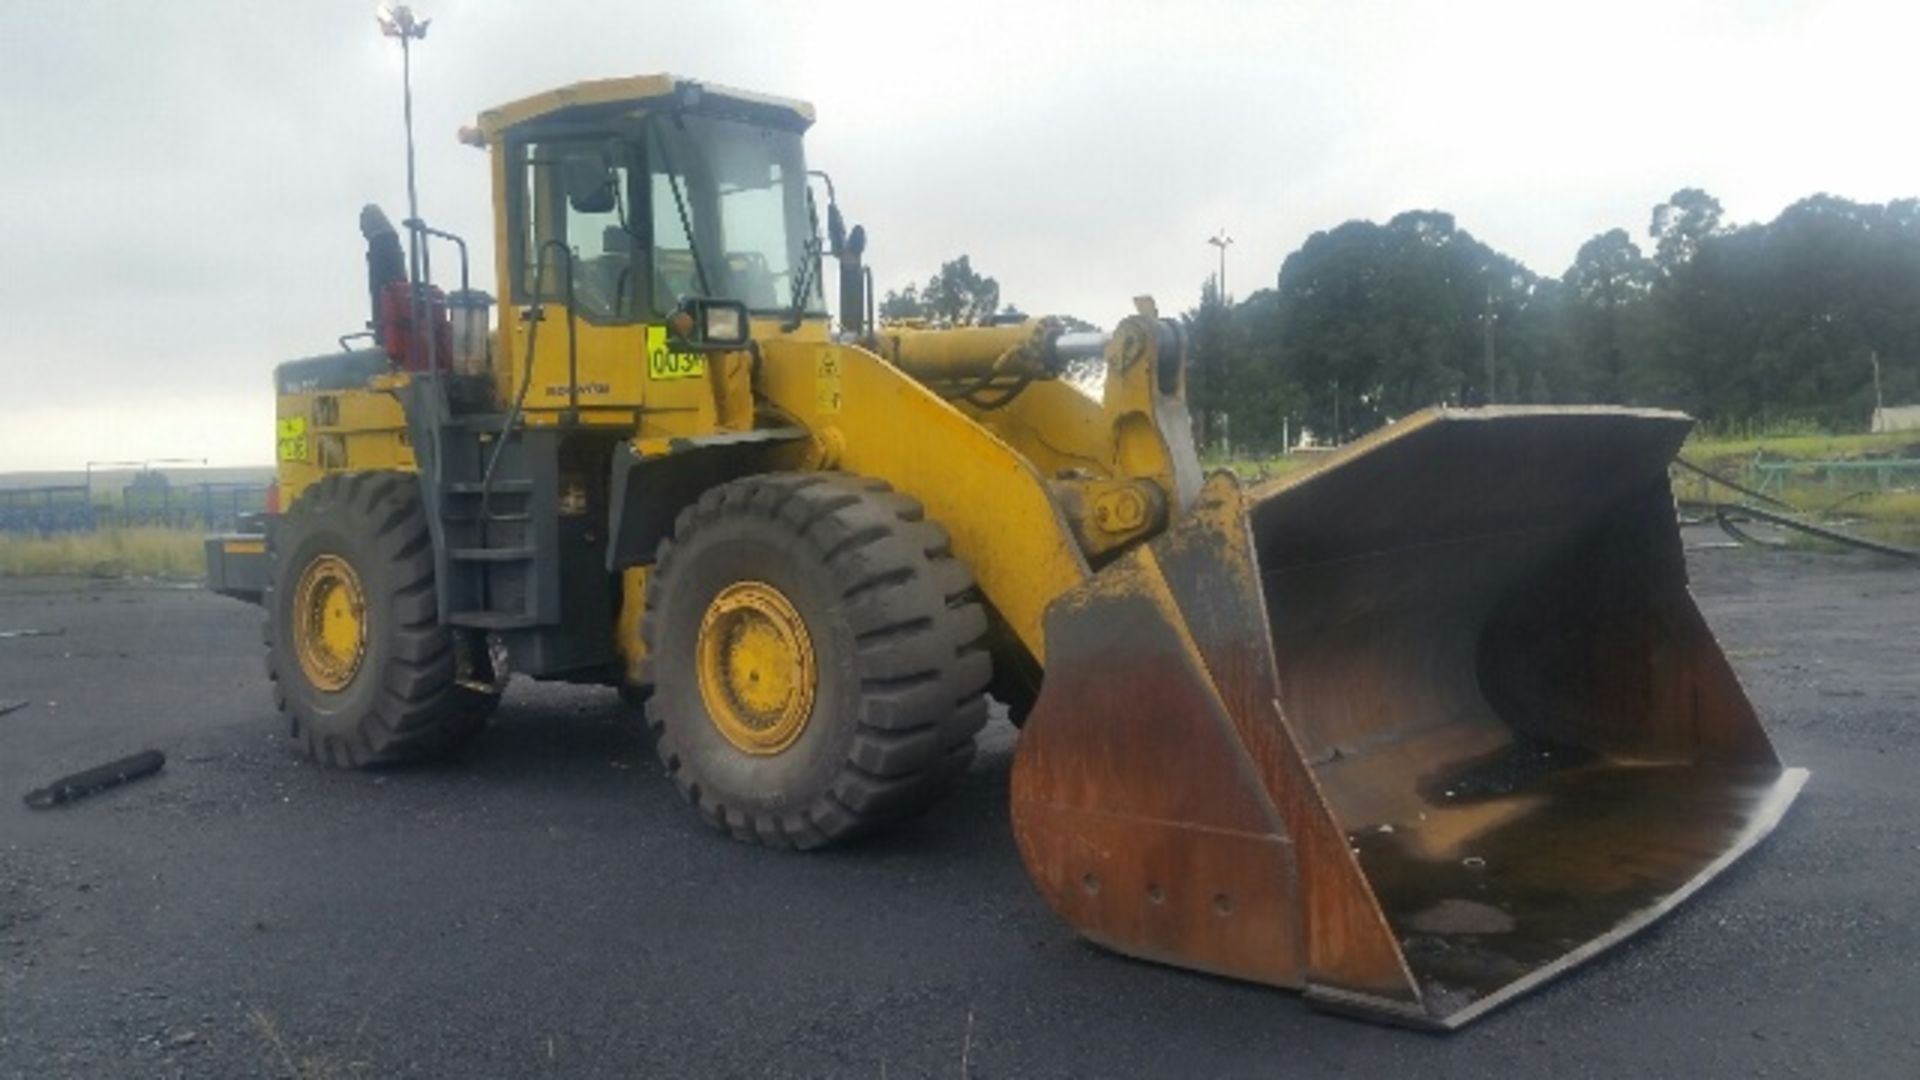 2000 KOMATSU WA500-3 FRONT END LOADER- SERIAL:50778 (LOCATED AT GLENCORE WITCONS COLLIERY)